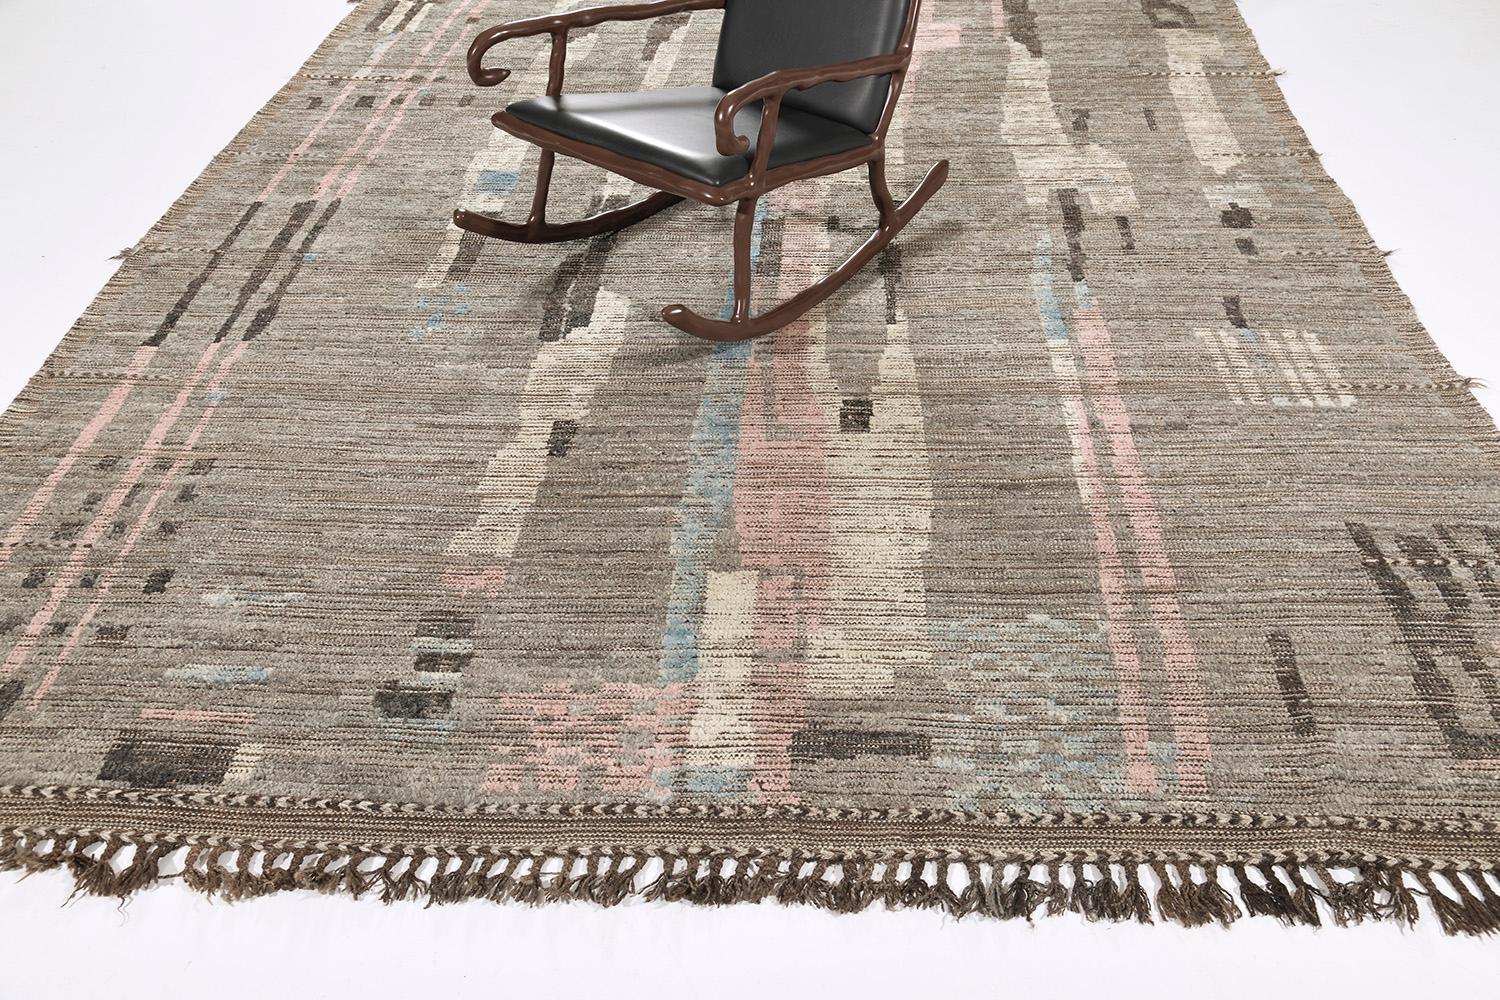 Nakhla is a natural earth-toned rug and a modern interpretation of the Moroccan world. These rugs' irregular patches of gray, pink, blue, and gray resemble the fibers of nature and their ability to be used for crafts such as cords and basketry.